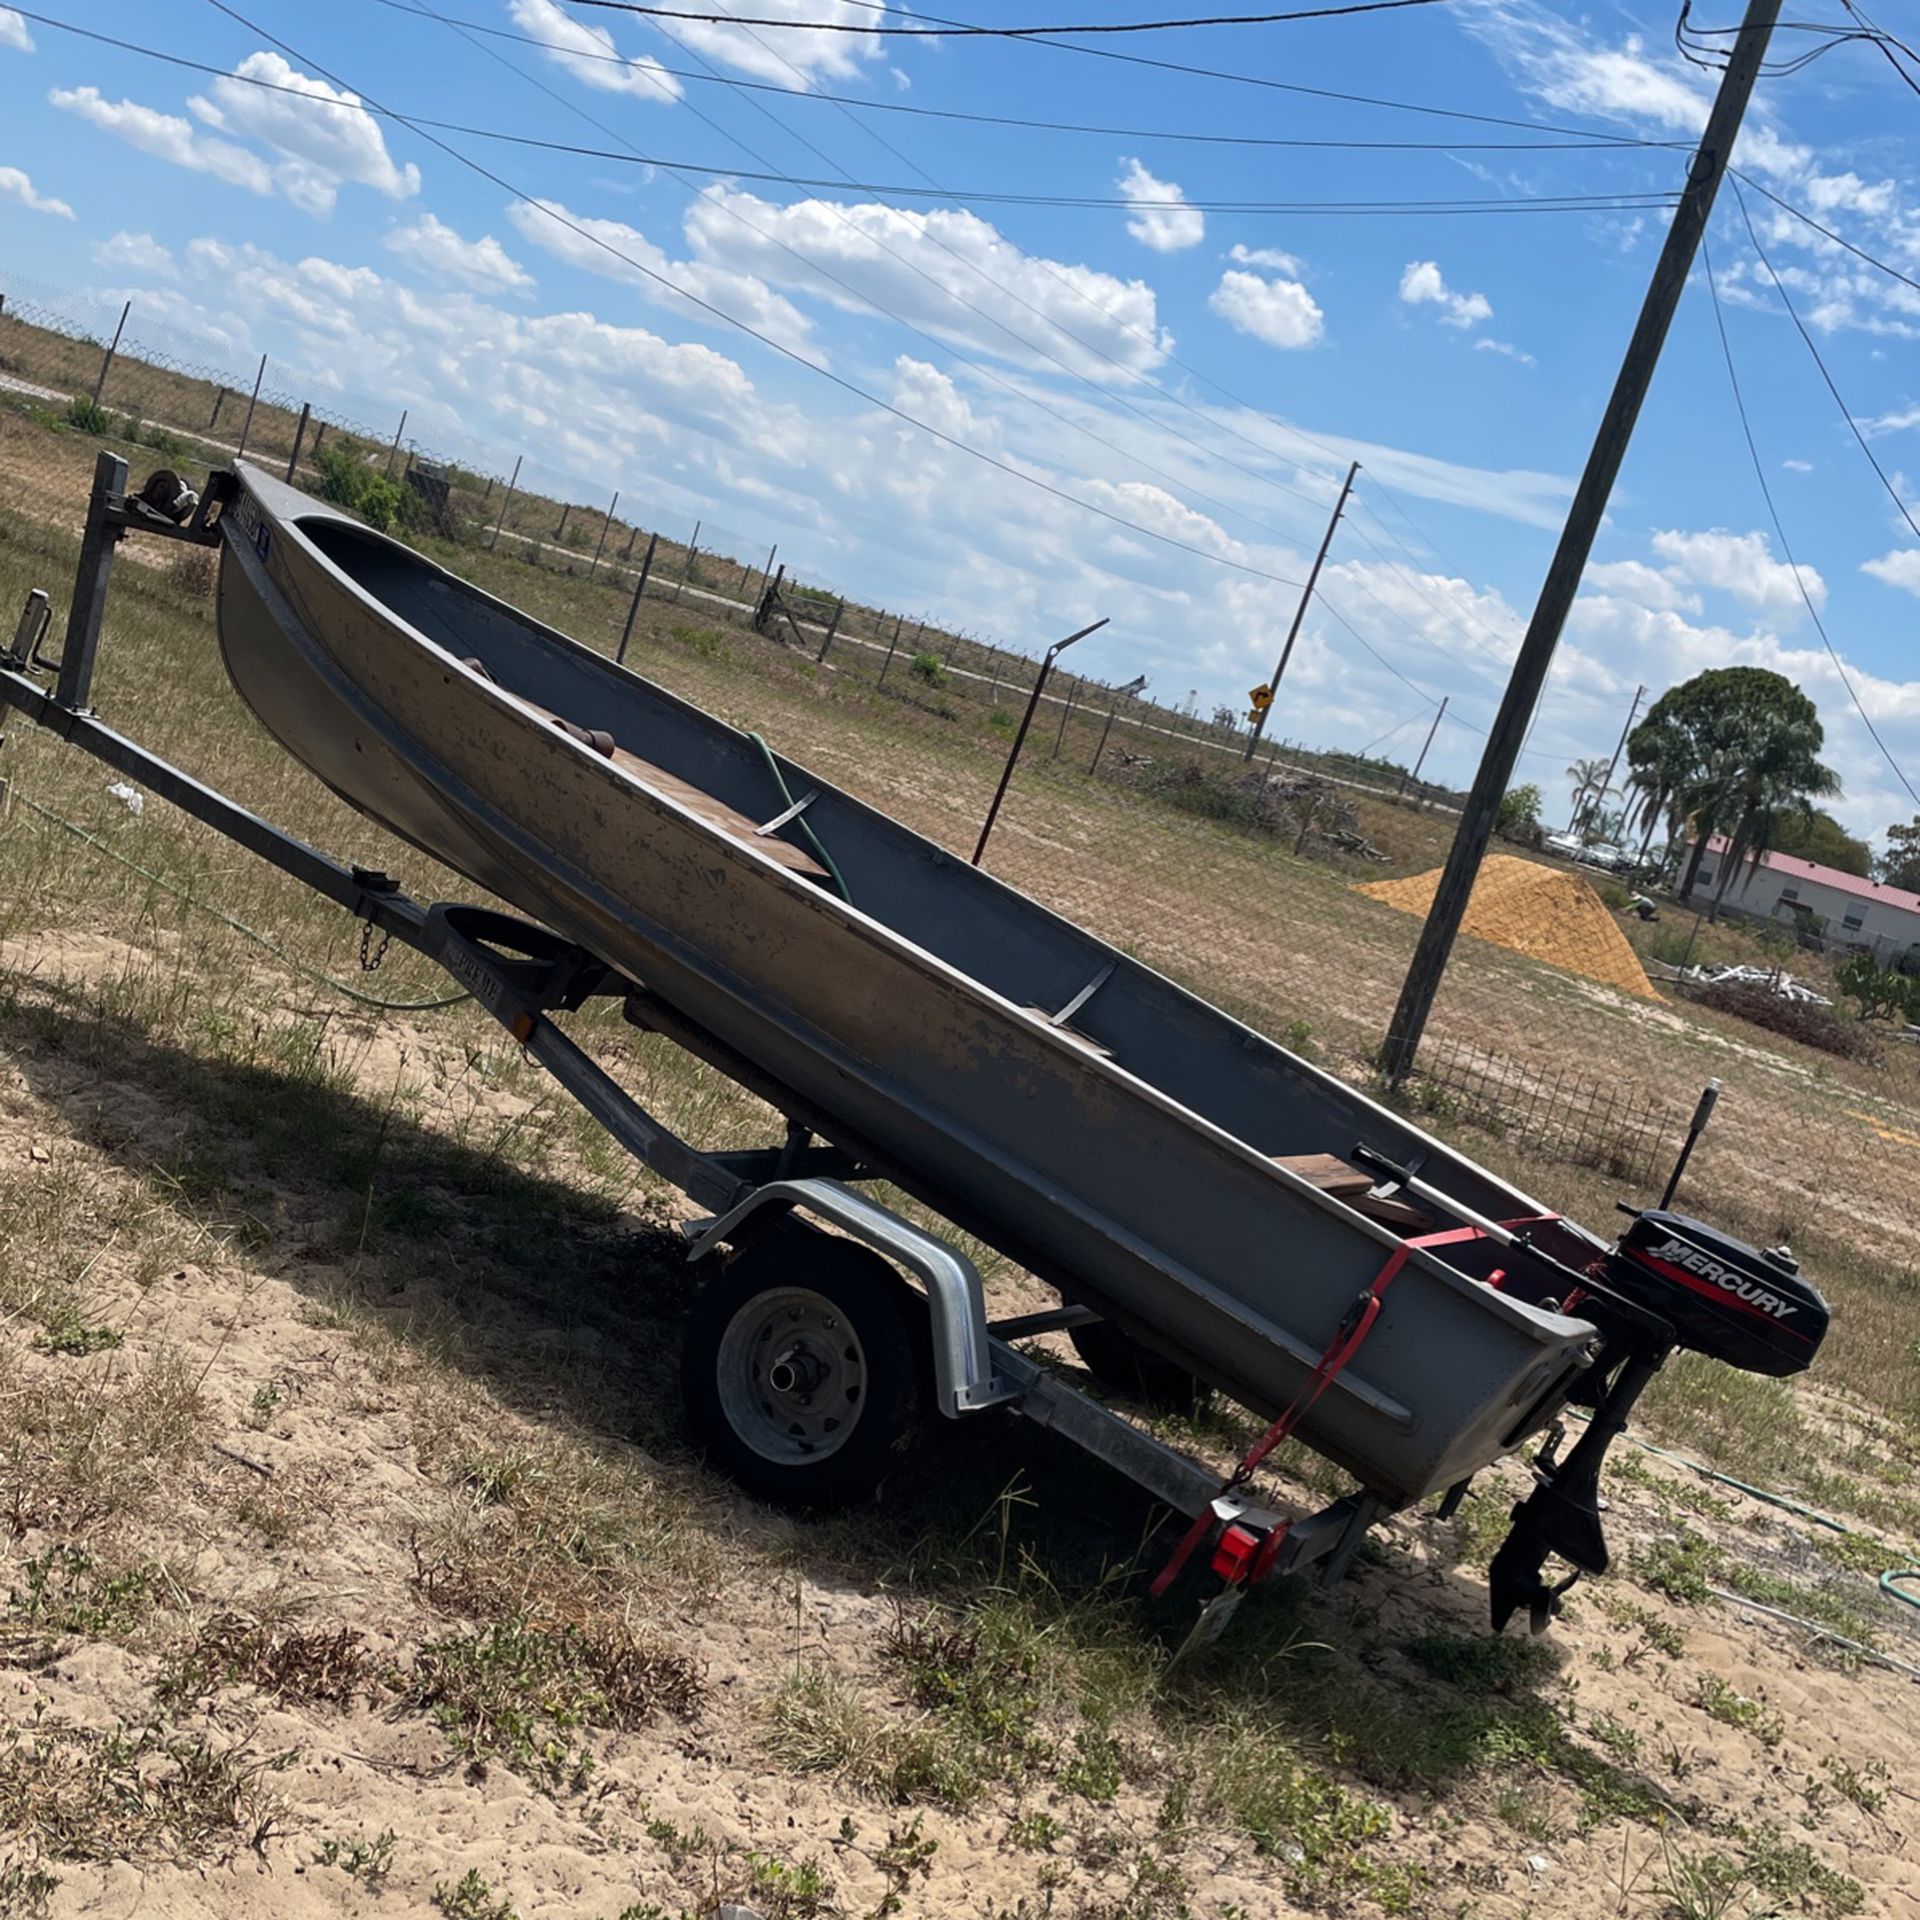 Photo Boat For Barter Looking For Golf Cart Or Two Seater Buggy , Pop Up Trailer in Witch Boat Trailer Would Be Included